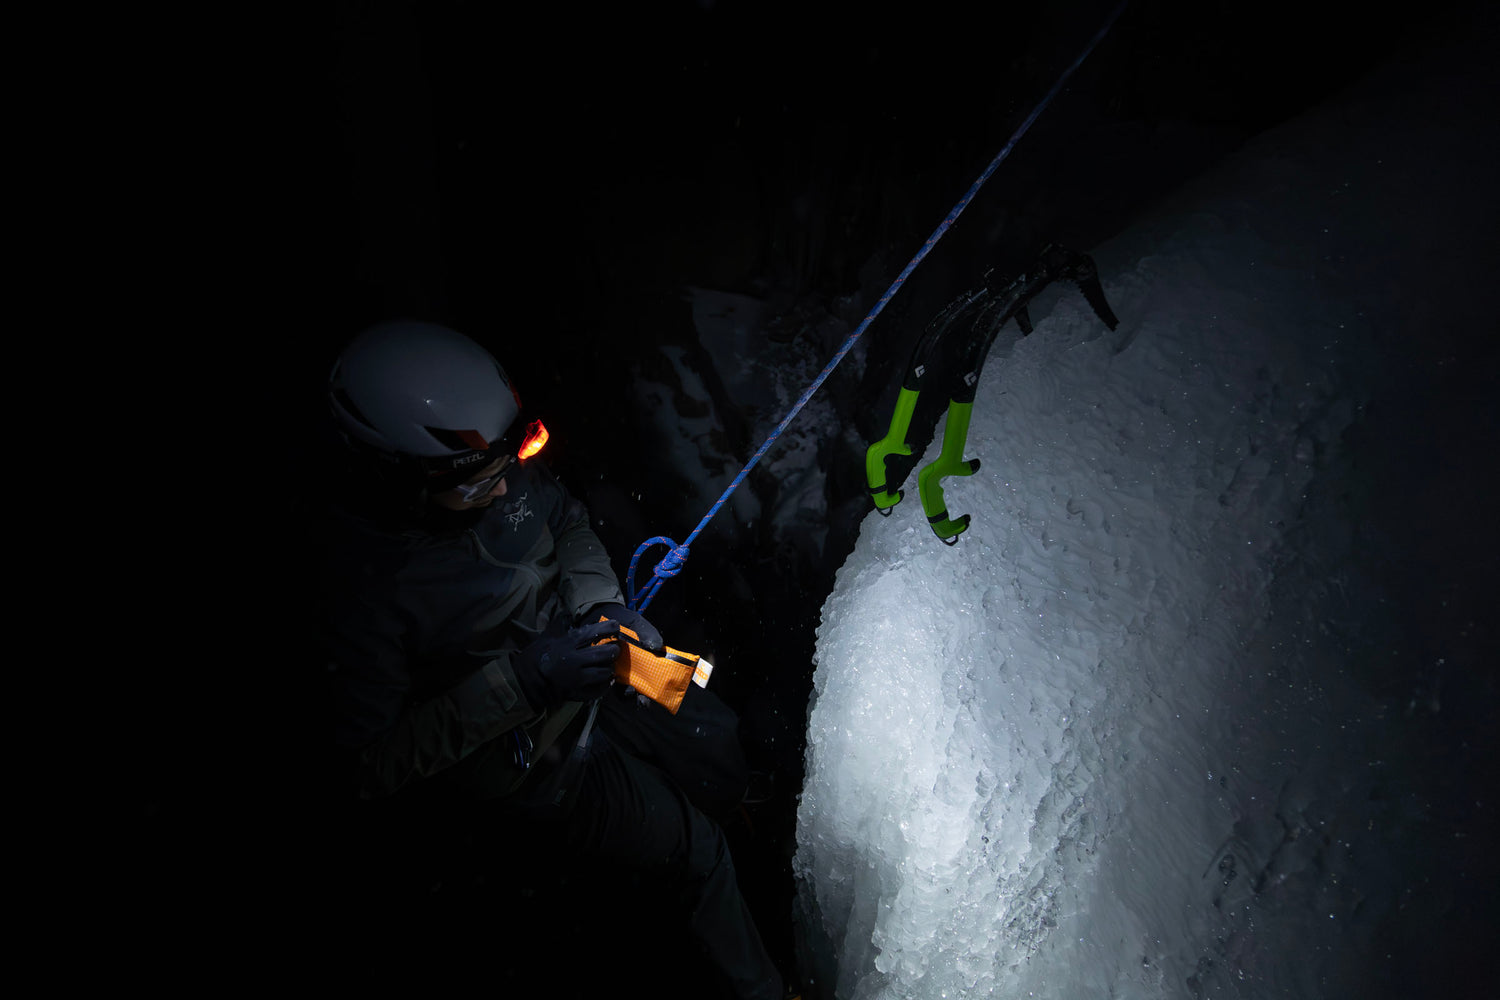 An ice climber opening a Peak First Aid First Aid kit in the dark illuminated by head lamp mountaineering